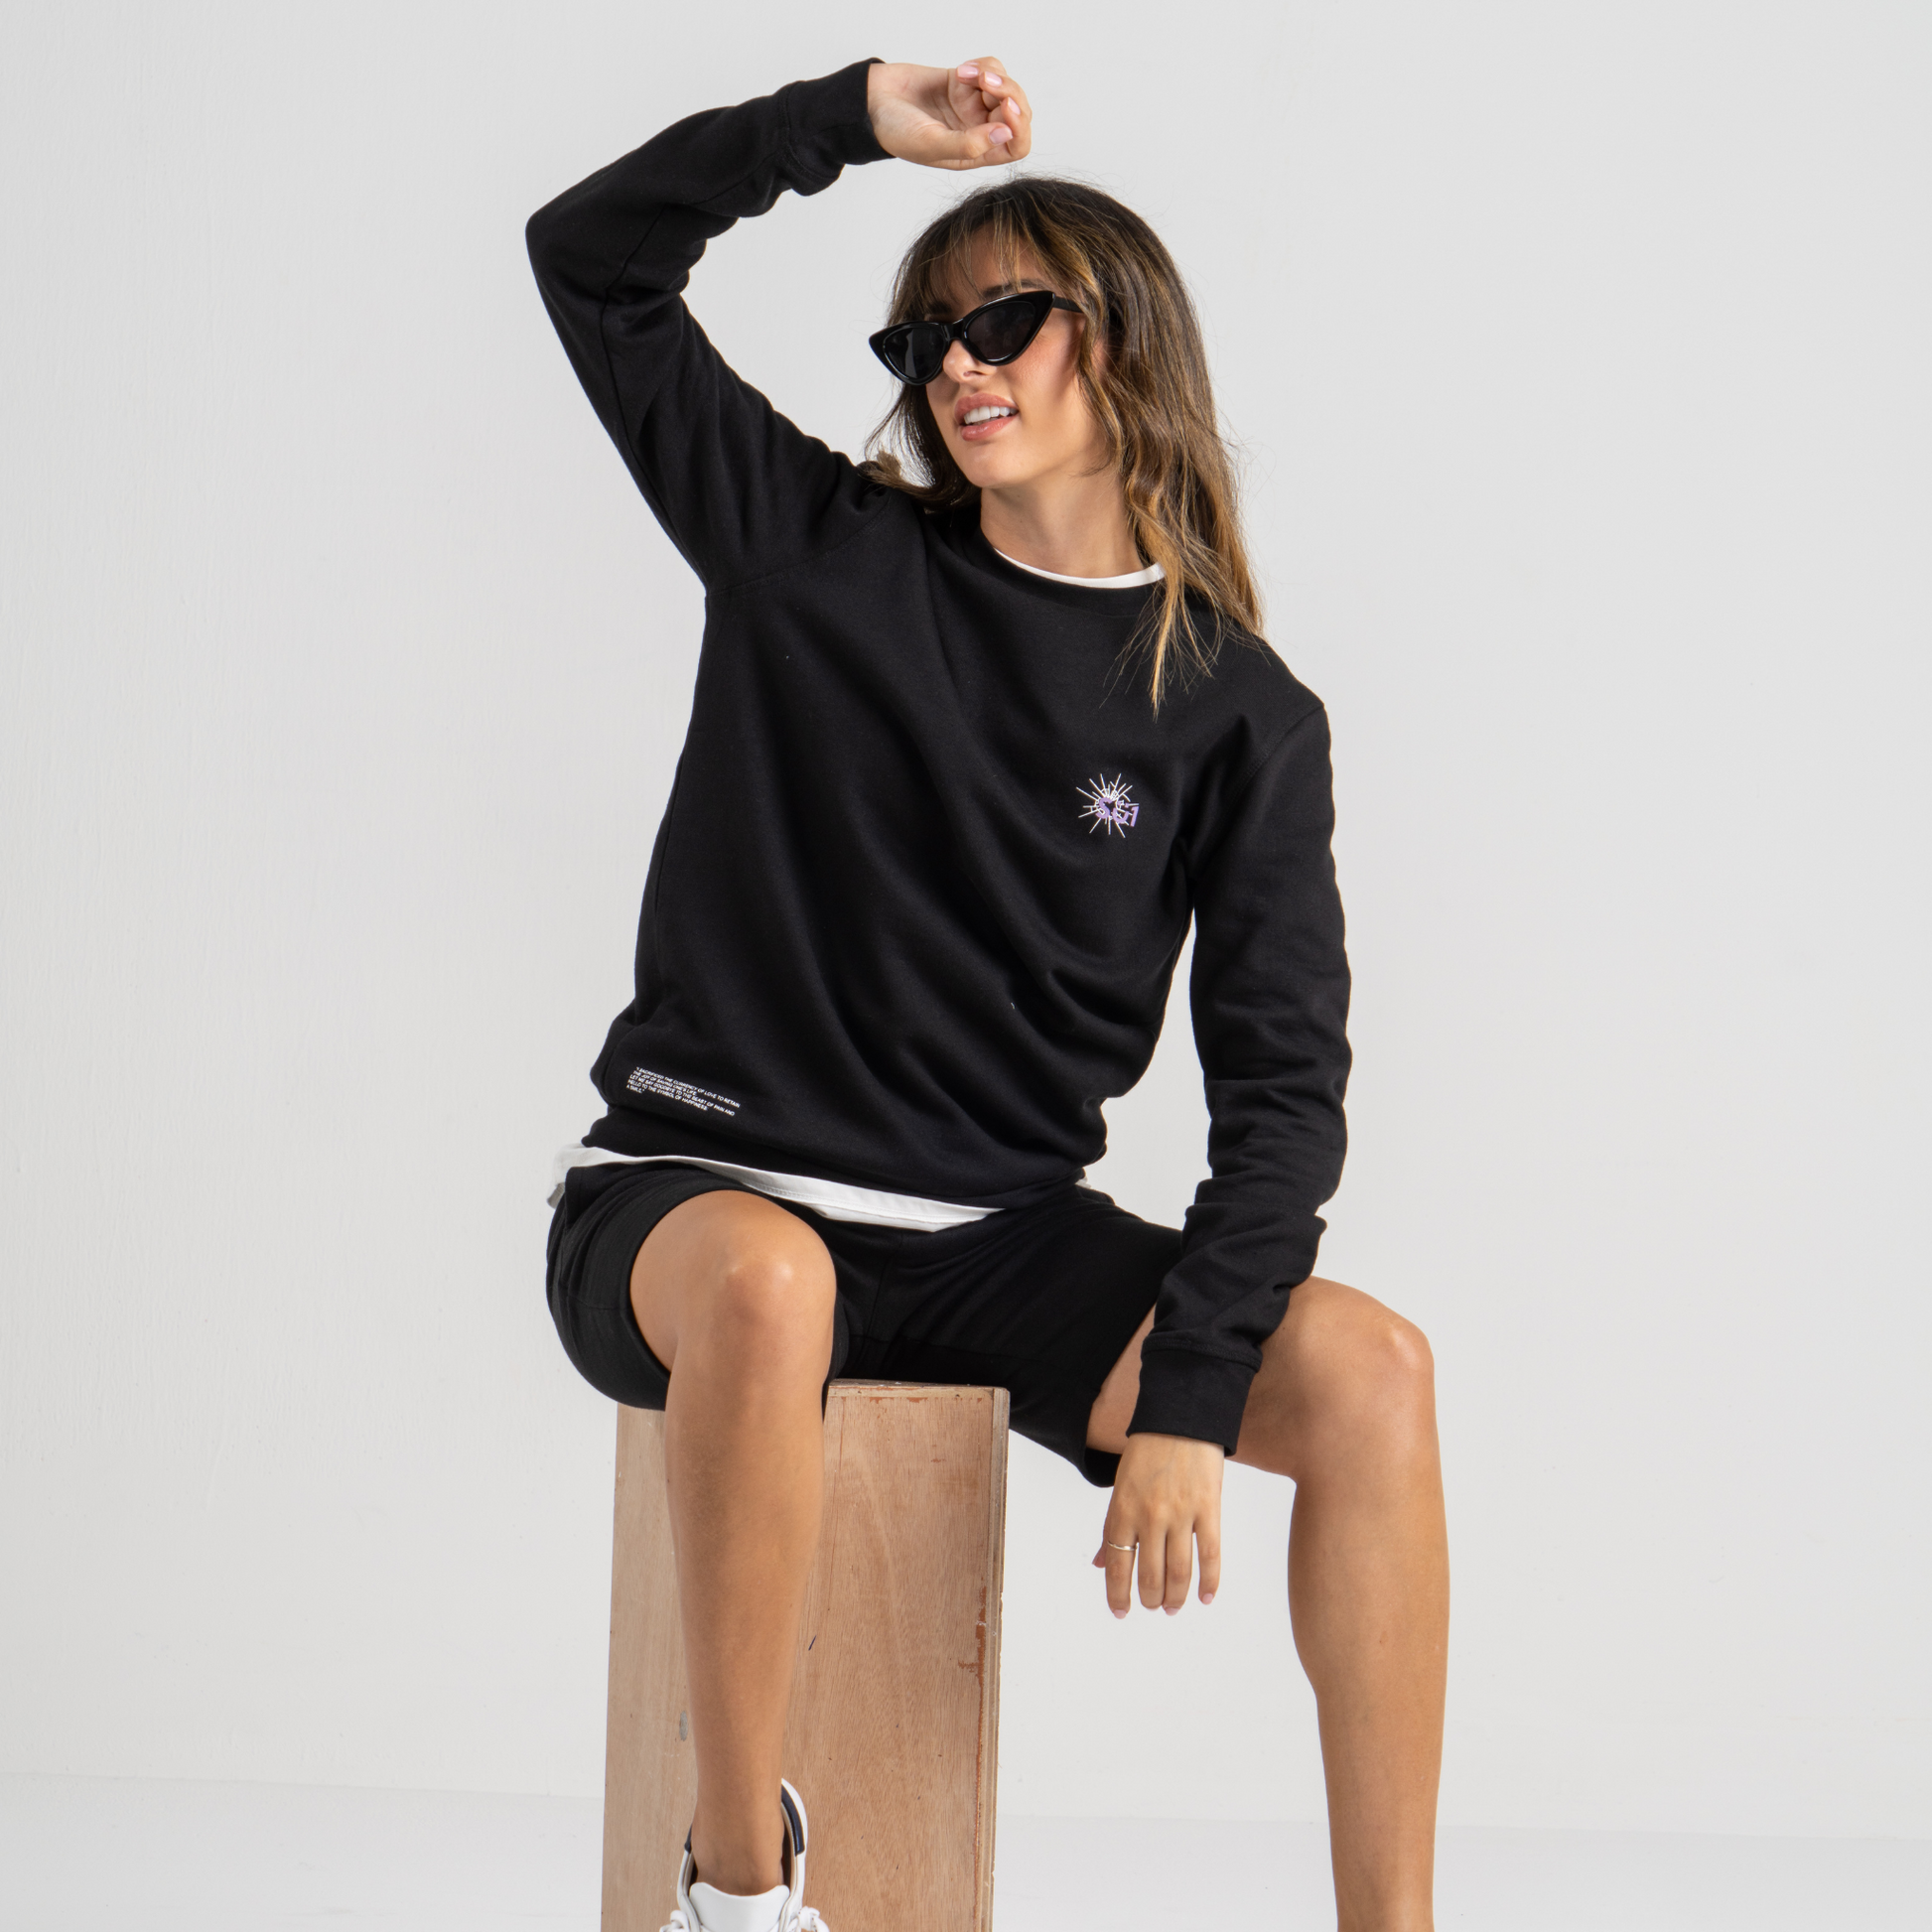 Woman wearing black sweater SU1 clothing brand and black shorts